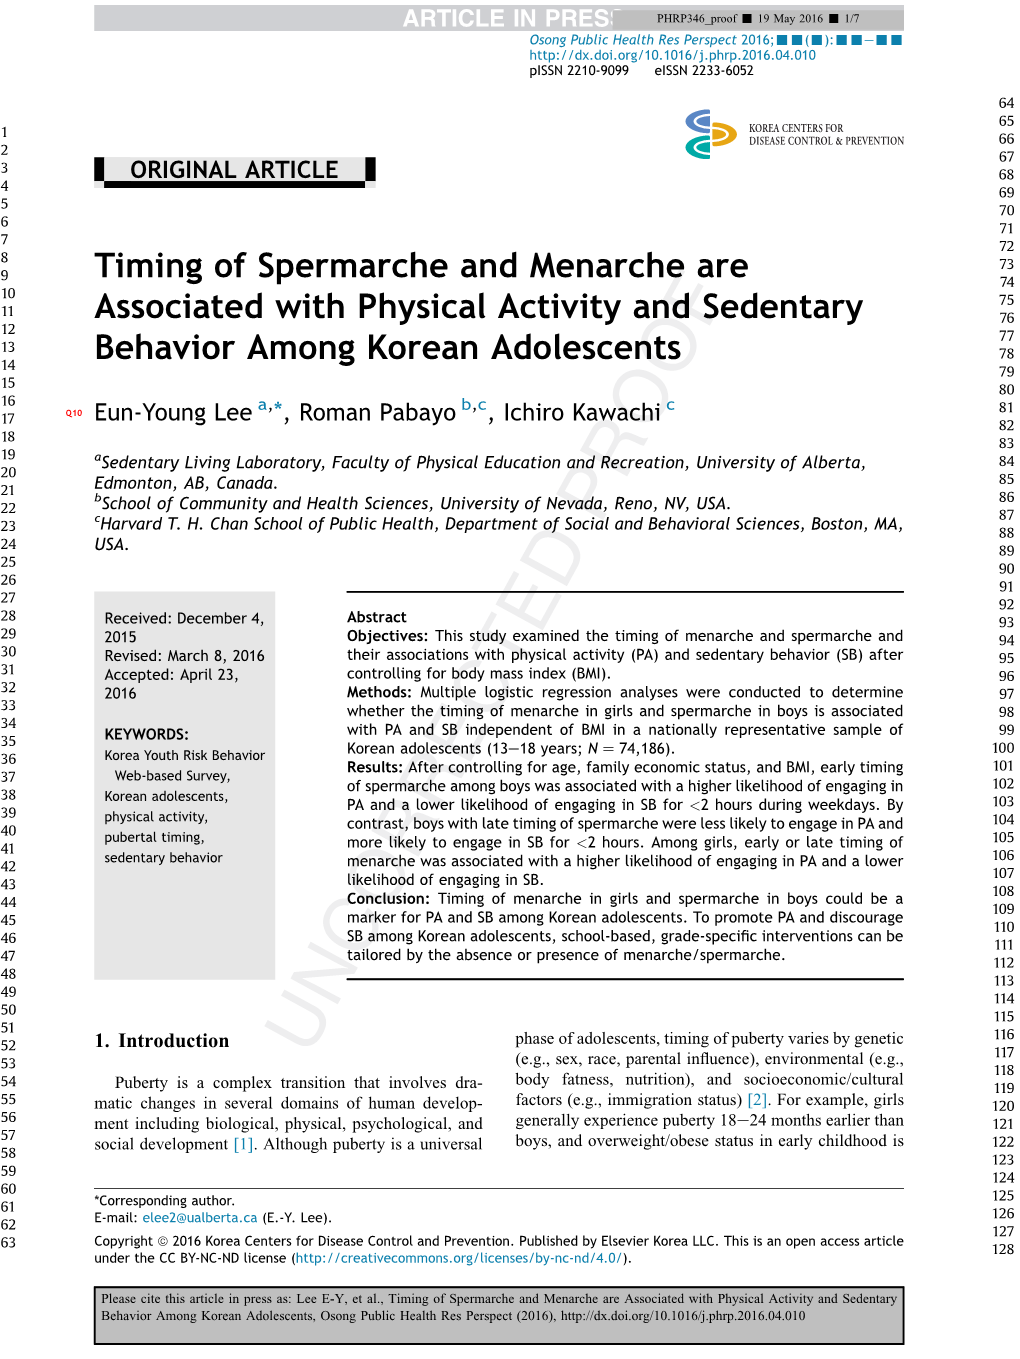 Timing of Spermarche and Menarche Are Associated With